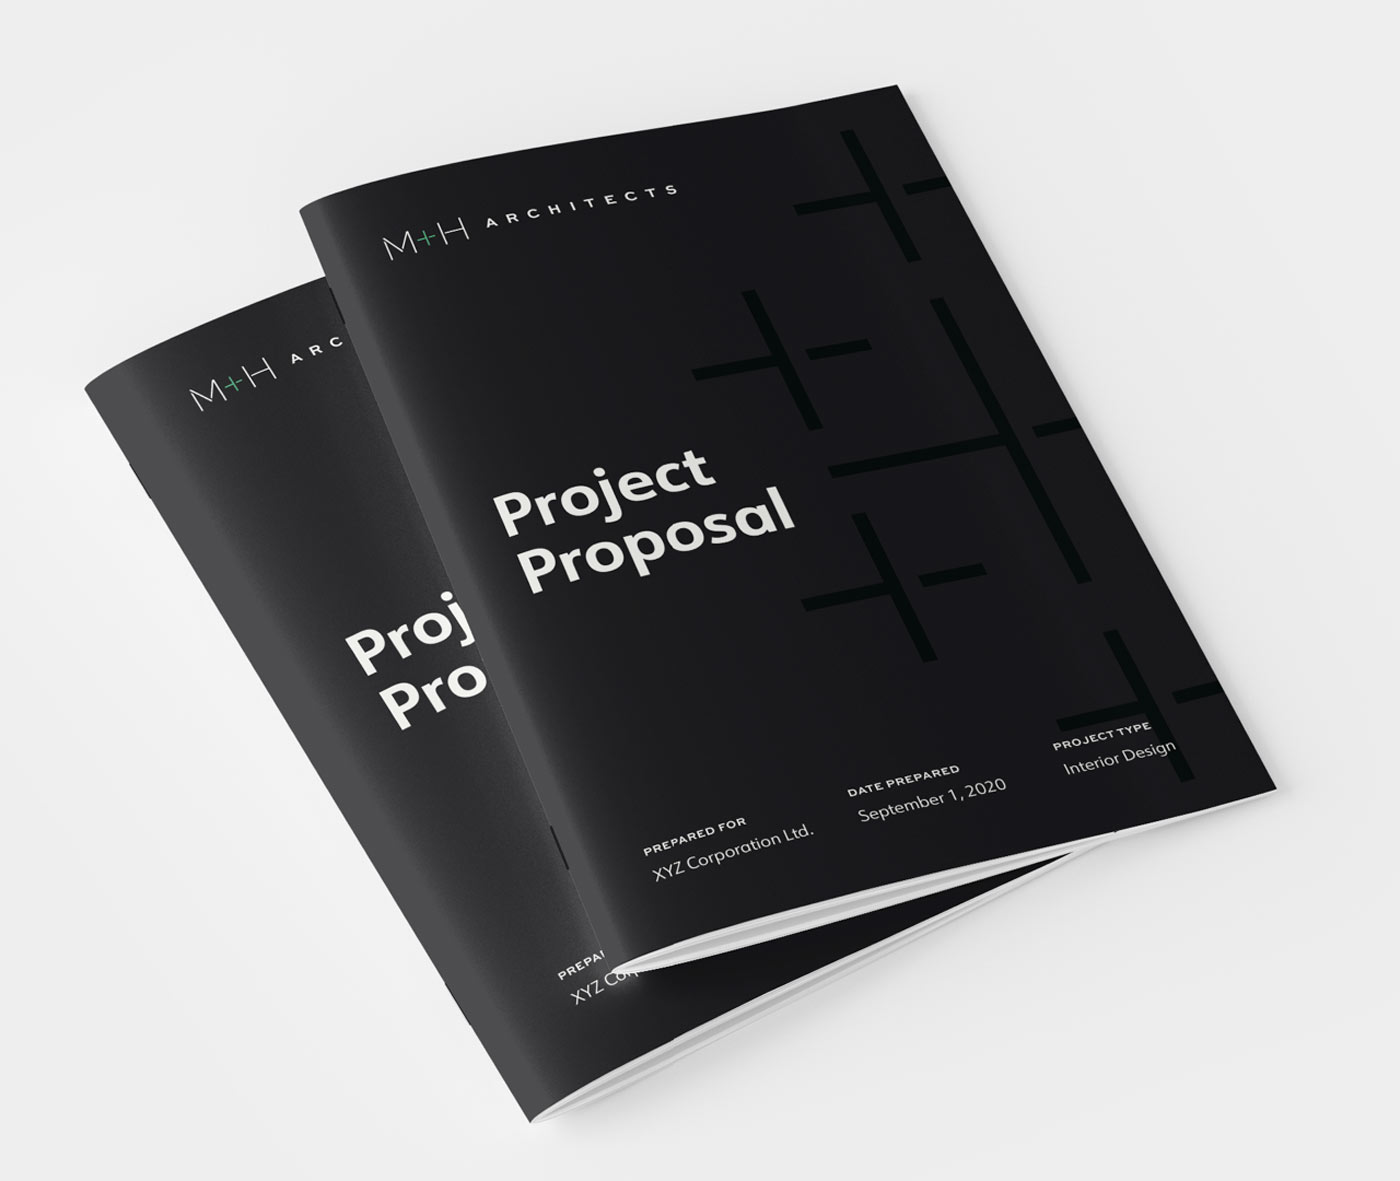 Project proposal mockups showing the new M+H Architects brand identity